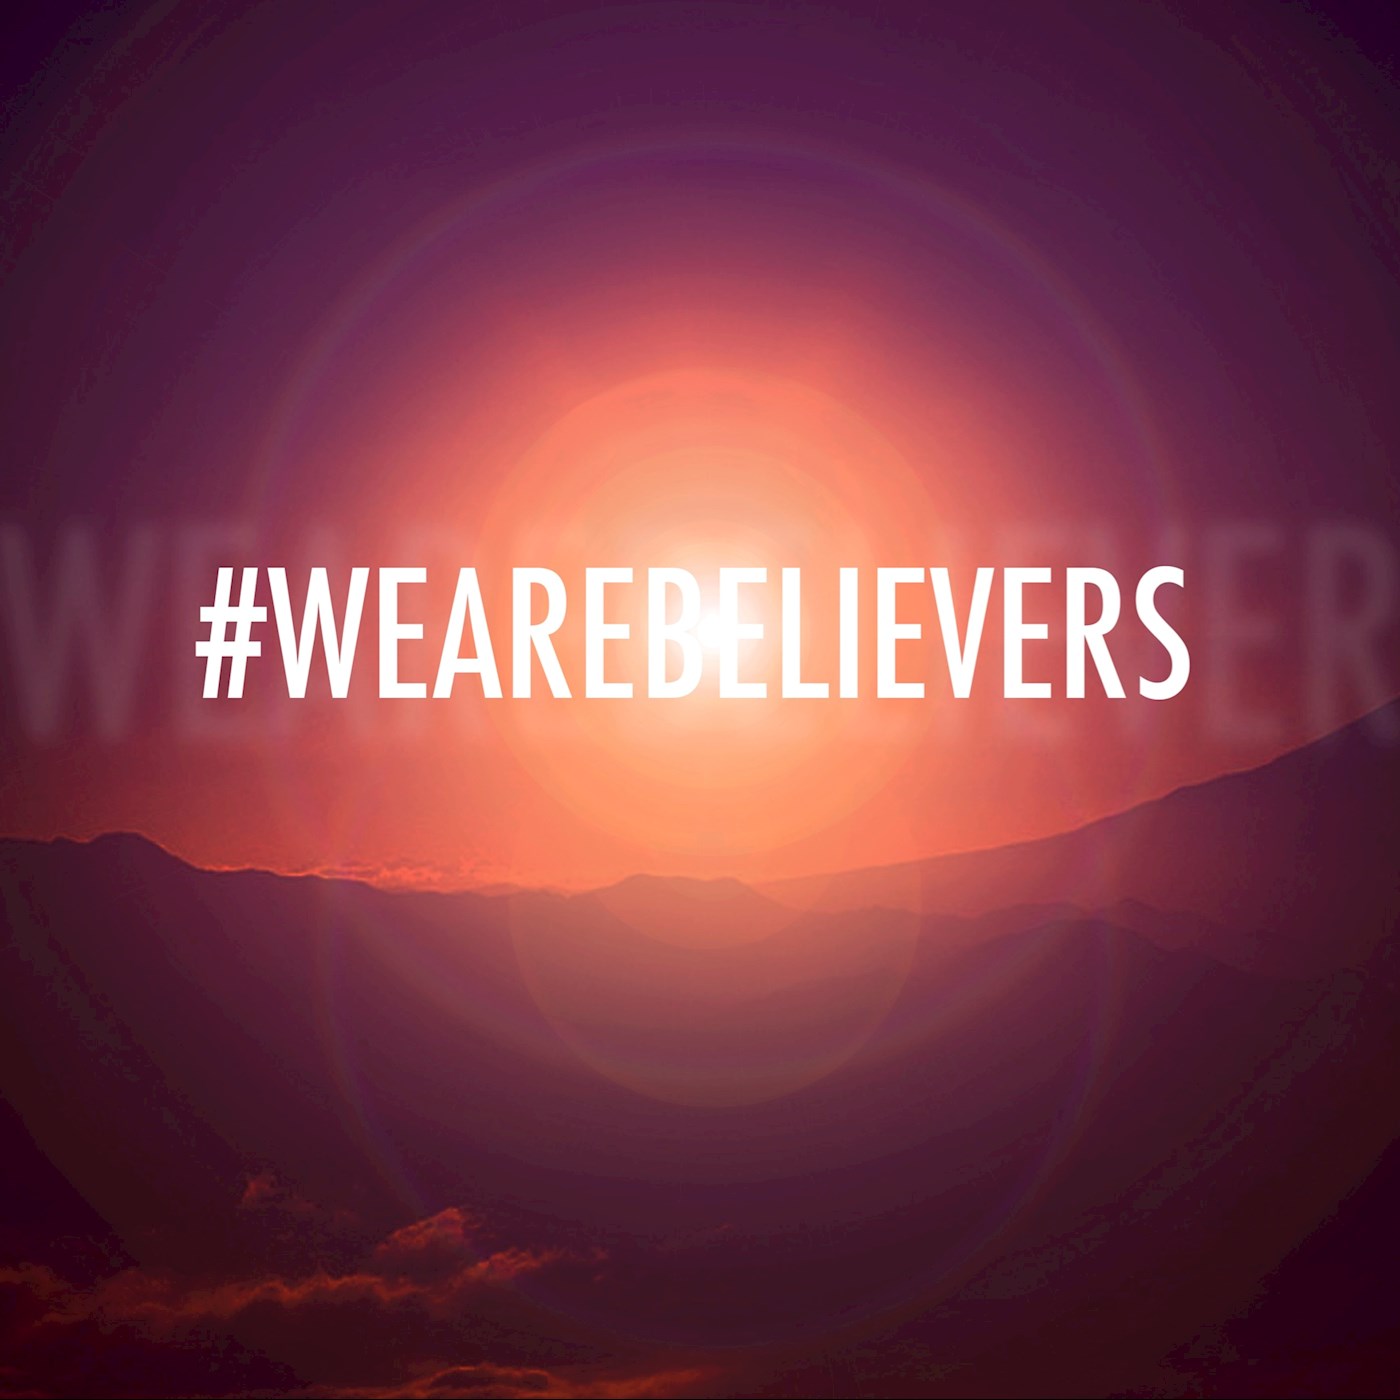 We Are Believers